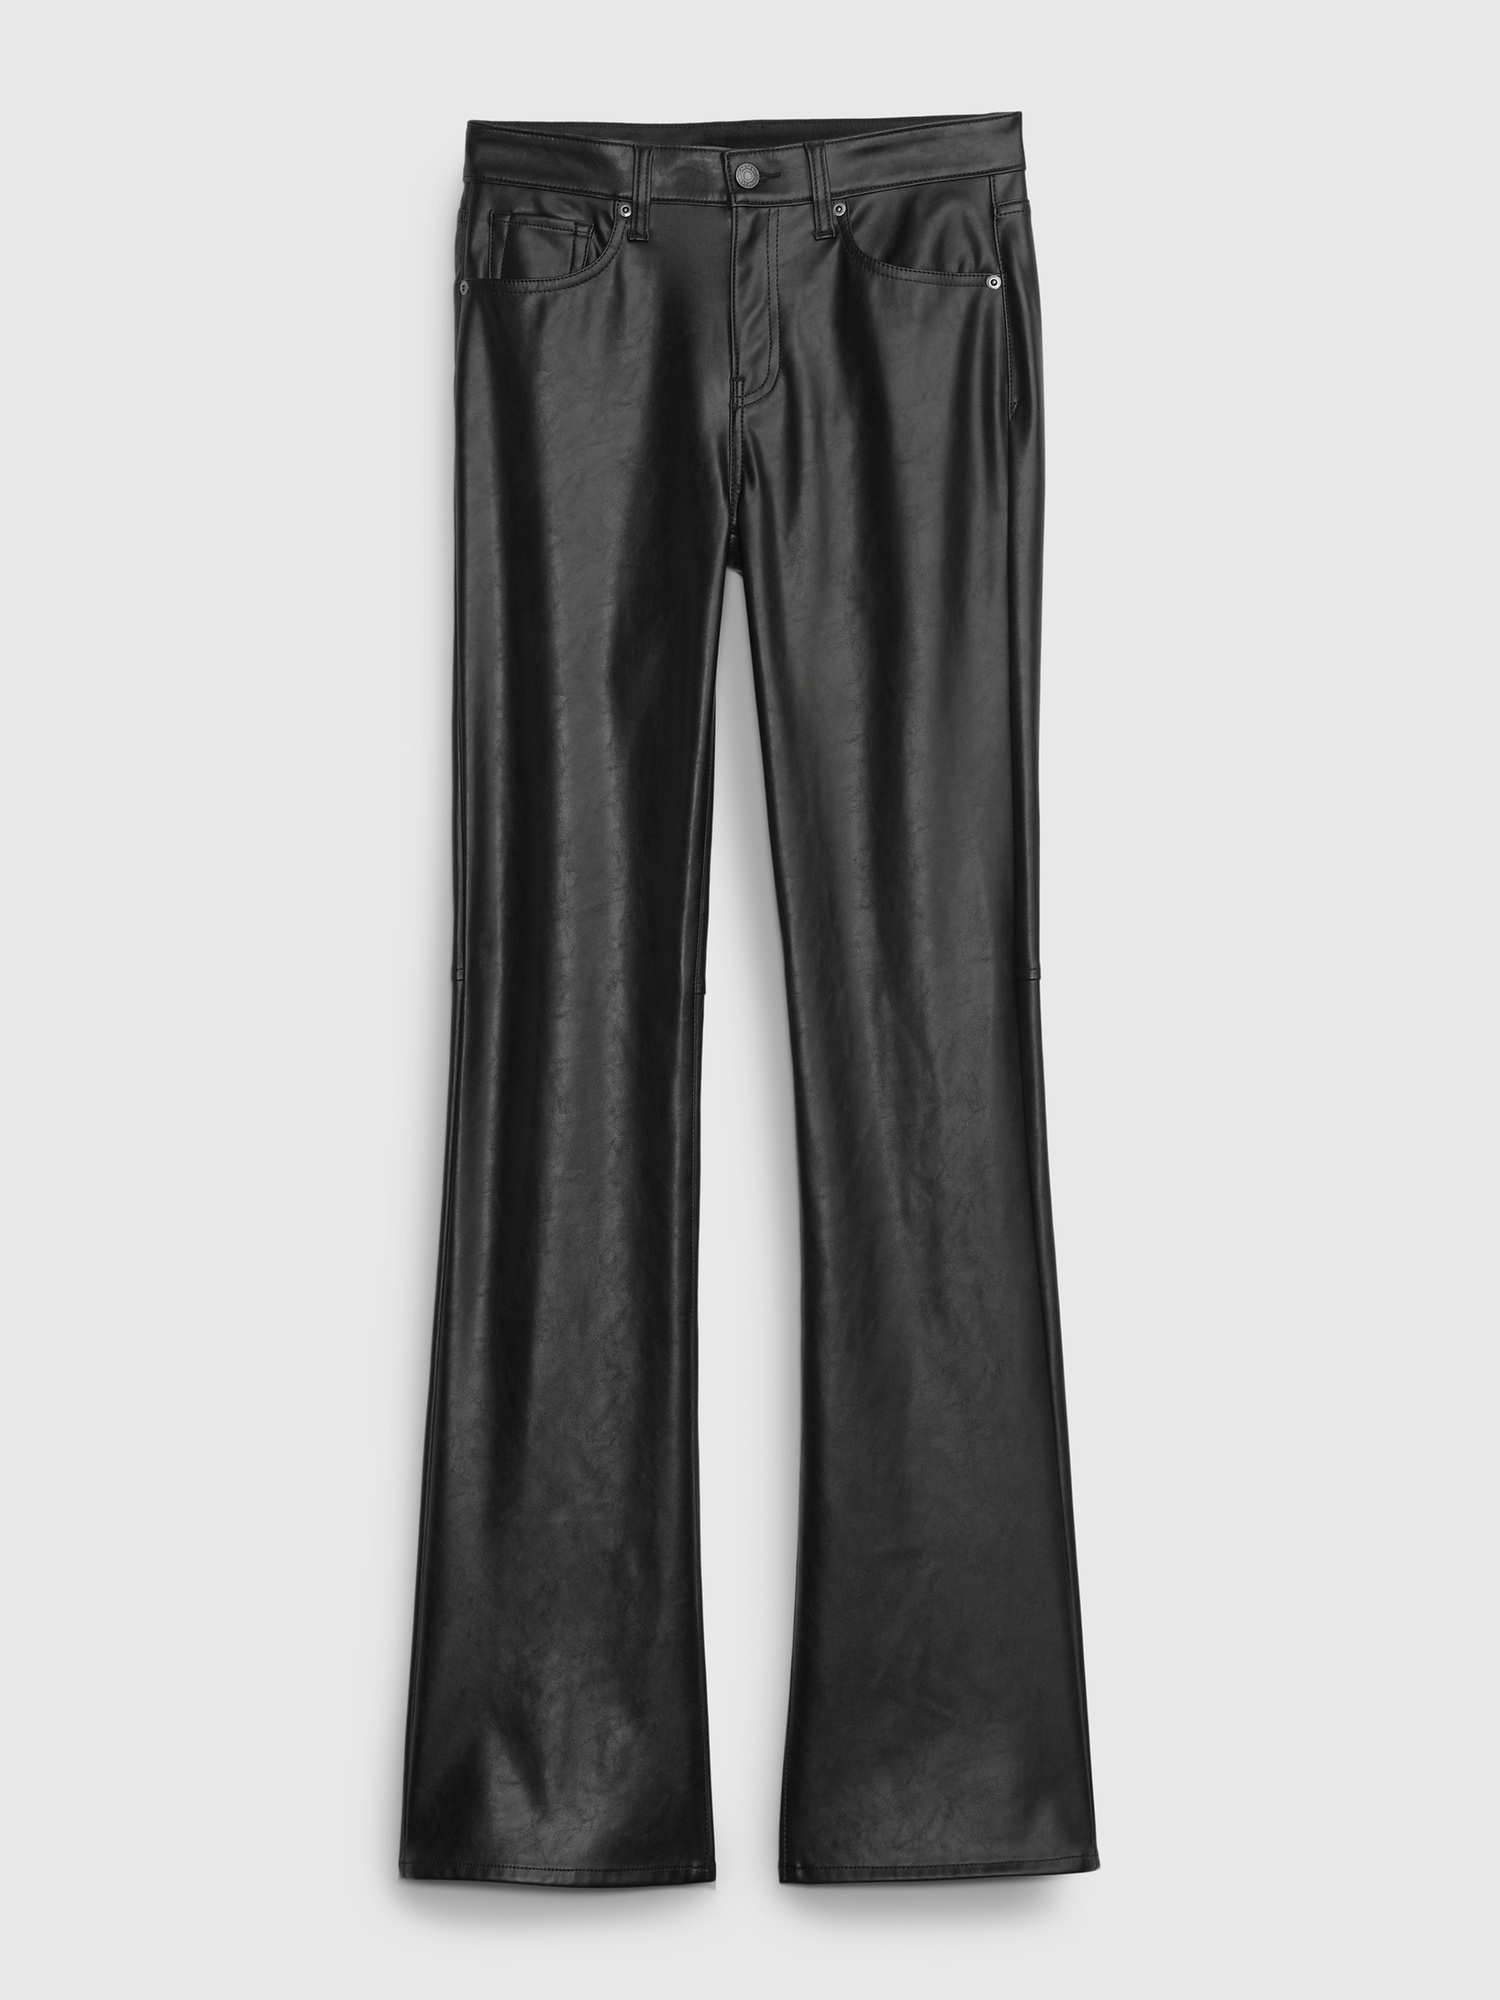 Mid Rise Vegan Leather Baby Boot Pants